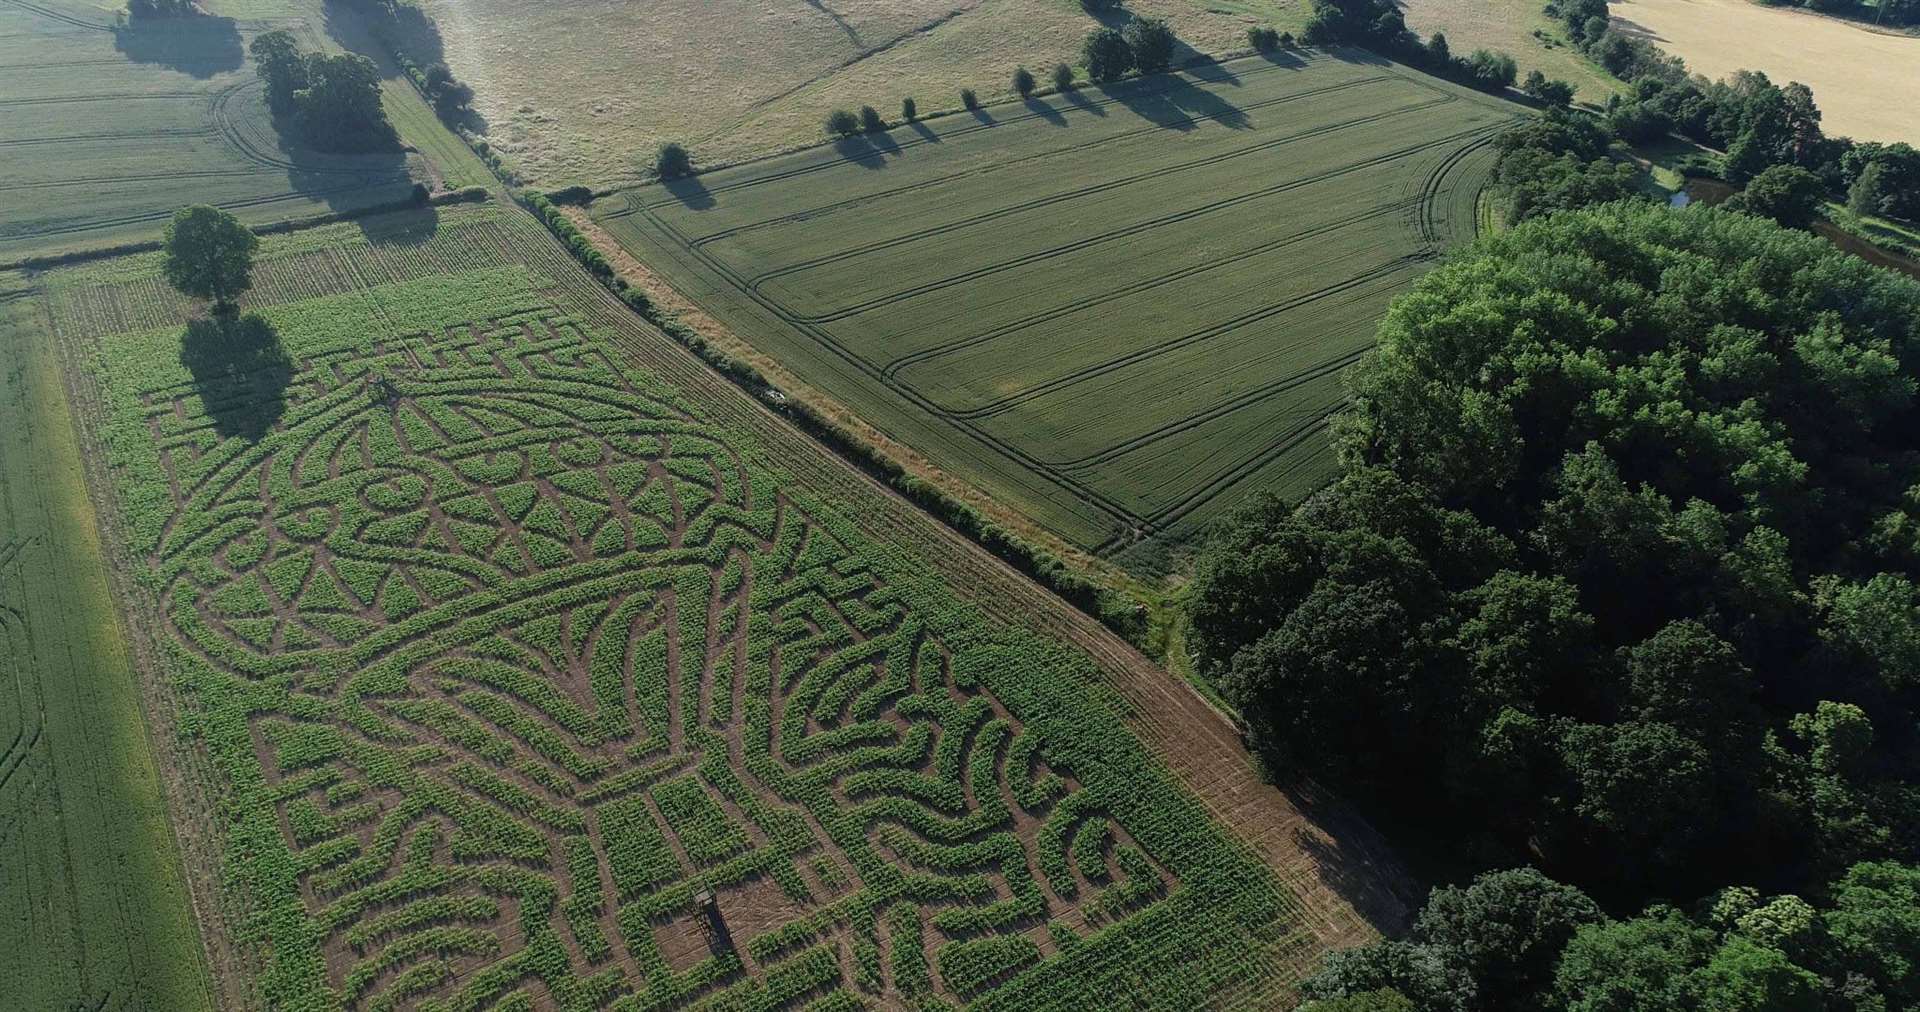 The hot air balloon design of the Maize Maze at Penshurst Place Picture: ©Limewood Productions